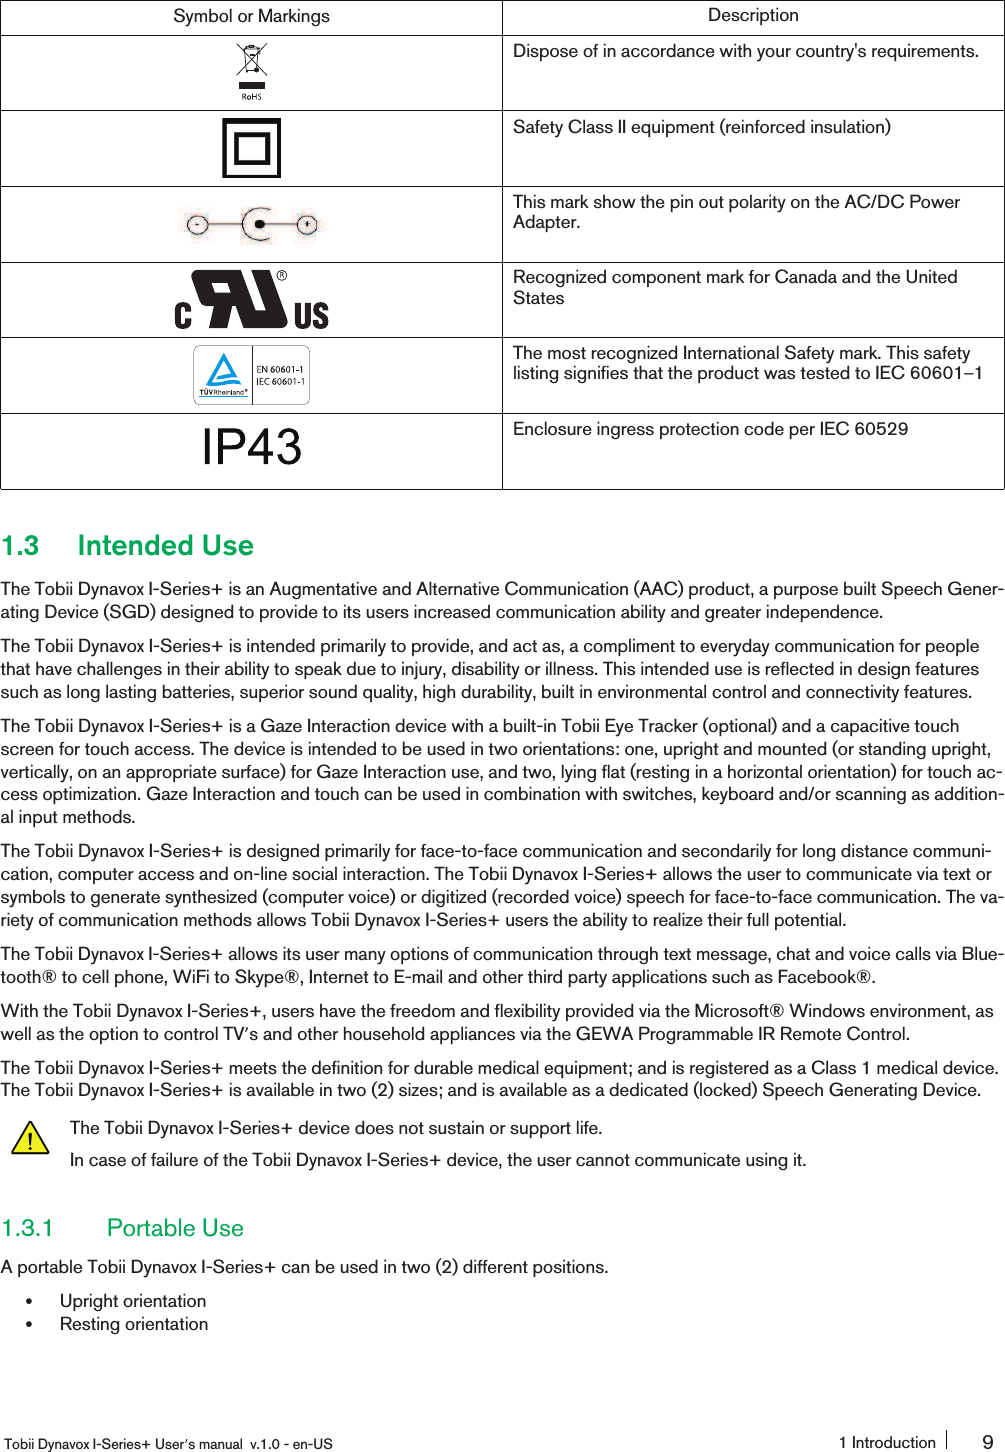 Symbol or Markings DescriptionDispose of in accordance with your country&apos;s requirements.Safety Class II equipment (reinforced insulation)This mark show the pin out polarity on the AC/DC PowerAdapter.Recognized component mark for Canada and the UnitedStatesThe most recognized International Safety mark. This safetylisting signifies that the product was tested to IEC 60601ʹ1Enclosure ingress protection code per IEC 605291.3 Intended UseThe Tobii Dynavox I-Series+ is an Augmentative and Alternative Communication (AAC) product, a purpose built Speech Gener-ating Device (SGD) designed to provide to its users increased communication ability and greater independence.The Tobii Dynavox I-Series+ is intended primarily to provide, and act as, a compliment to everyday communication for peoplethat have challenges in their ability to speak due to injury, disability or illness. This intended use is reflected in design featuressuch as long lasting batteries, superior sound quality, high durability, built in environmental control and connectivity features.The Tobii Dynavox I-Series+ is a Gaze Interaction device with a built-in Tobii Eye Tracker (optional) and a capacitive touchscreen for touch access. The device is intended to be used in two orientations: one, upright and mounted (or standing upright,vertically, on an appropriate surface) for Gaze Interaction use, and two, lying flat (resting in a horizontal orientation) for touch ac-cess optimization. Gaze Interaction and touch can be used in combination with switches, keyboard and/or scanning as addition-al input methods.The Tobii Dynavox I-Series+ is designed primarily for face-to-face communication and secondarily for long distance communi-cation, computer access and on-line social interaction. The Tobii Dynavox I-Series+ allows the user to communicate via text orsymbols to generate synthesized (computer voice) or digitized (recorded voice) speech for face-to-face communication. The va-riety of communication methods allows Tobii Dynavox I-Series+ users the ability to realize their full potential.The Tobii Dynavox I-Series+ allows its user many options of communication through text message, chat and voice calls via Blue-tooth® to cell phone, WiFi to Skype®, Internet to E-mail and other third party applications such as Facebook®.With the Tobii Dynavox I-Series+, users have the freedom and flexibility provided via the Microsoft® Windows environment, aswell as the option to control TV͛s and other household appliances via the GEWA Programmable IR Remote Control.The Tobii Dynavox I-Series+ meets the definition for durable medical equipment; and is registered as a Class 1 medical device.The Tobii Dynavox I-Series+ is available in two (2) sizes; and is available as a dedicated (locked) Speech Generating Device.The Tobii Dynavox I-Series+ device does not sustain or support life.In case of failure of the Tobii Dynavox I-Series+ device, the user cannot communicate using it.1.3.1 Portable UseA portable Tobii Dynavox I-Series+ can be used in two (2) different positions.ͻUpright orientationͻResting orientationTobii Dynavox I-Series+ User͛s manual v.1.0 - en-US 1 Introduction 9